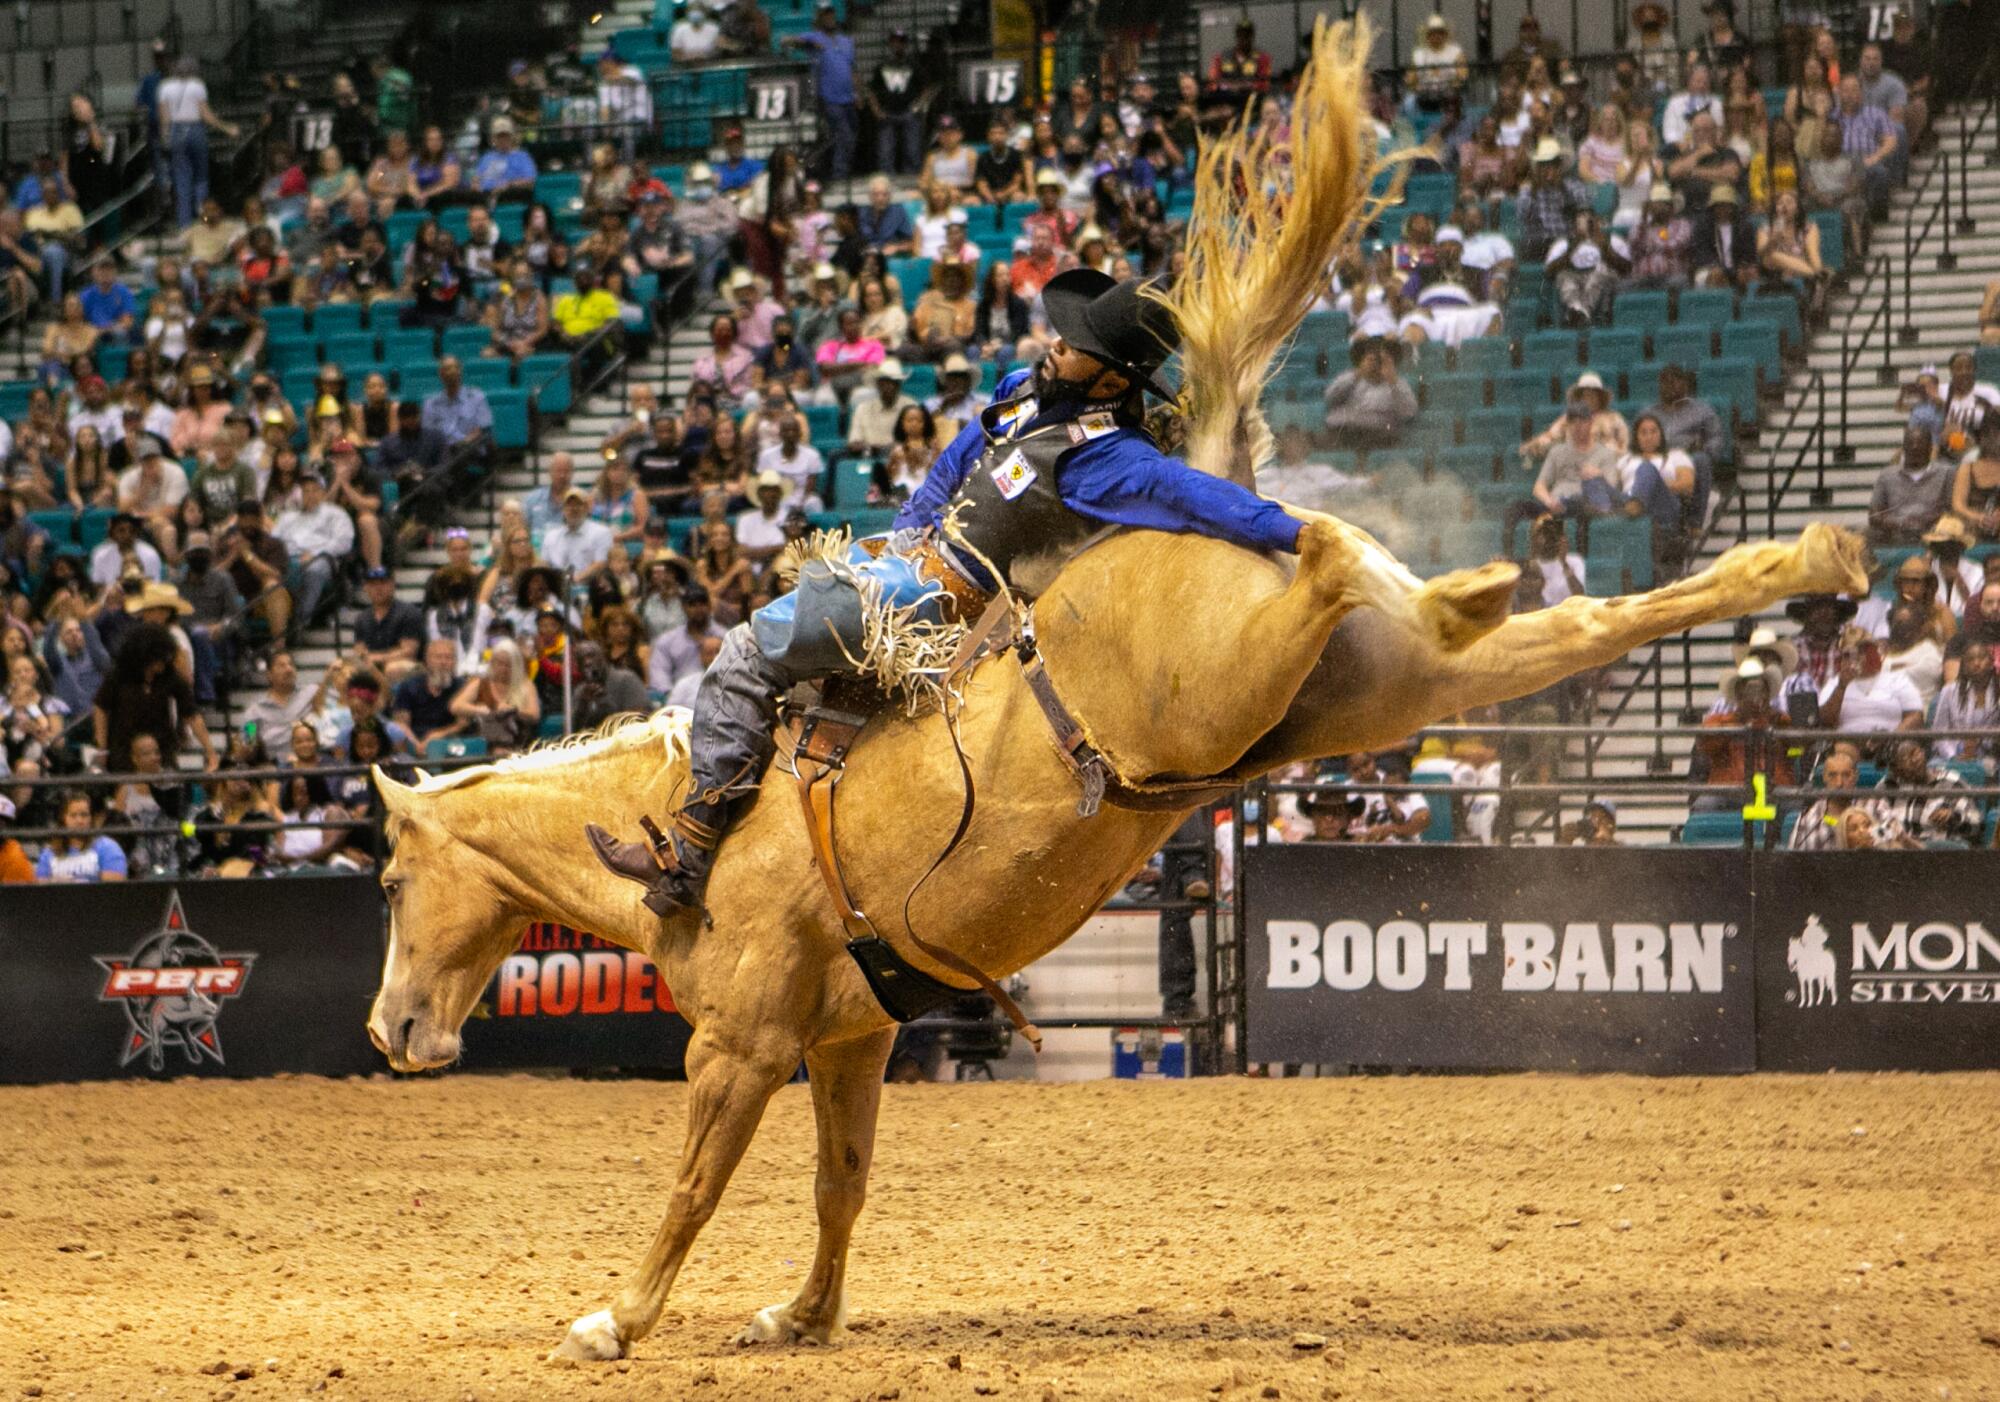 A cowboy leans back with his free arm outstretched in the finals of the bareback riding competition 